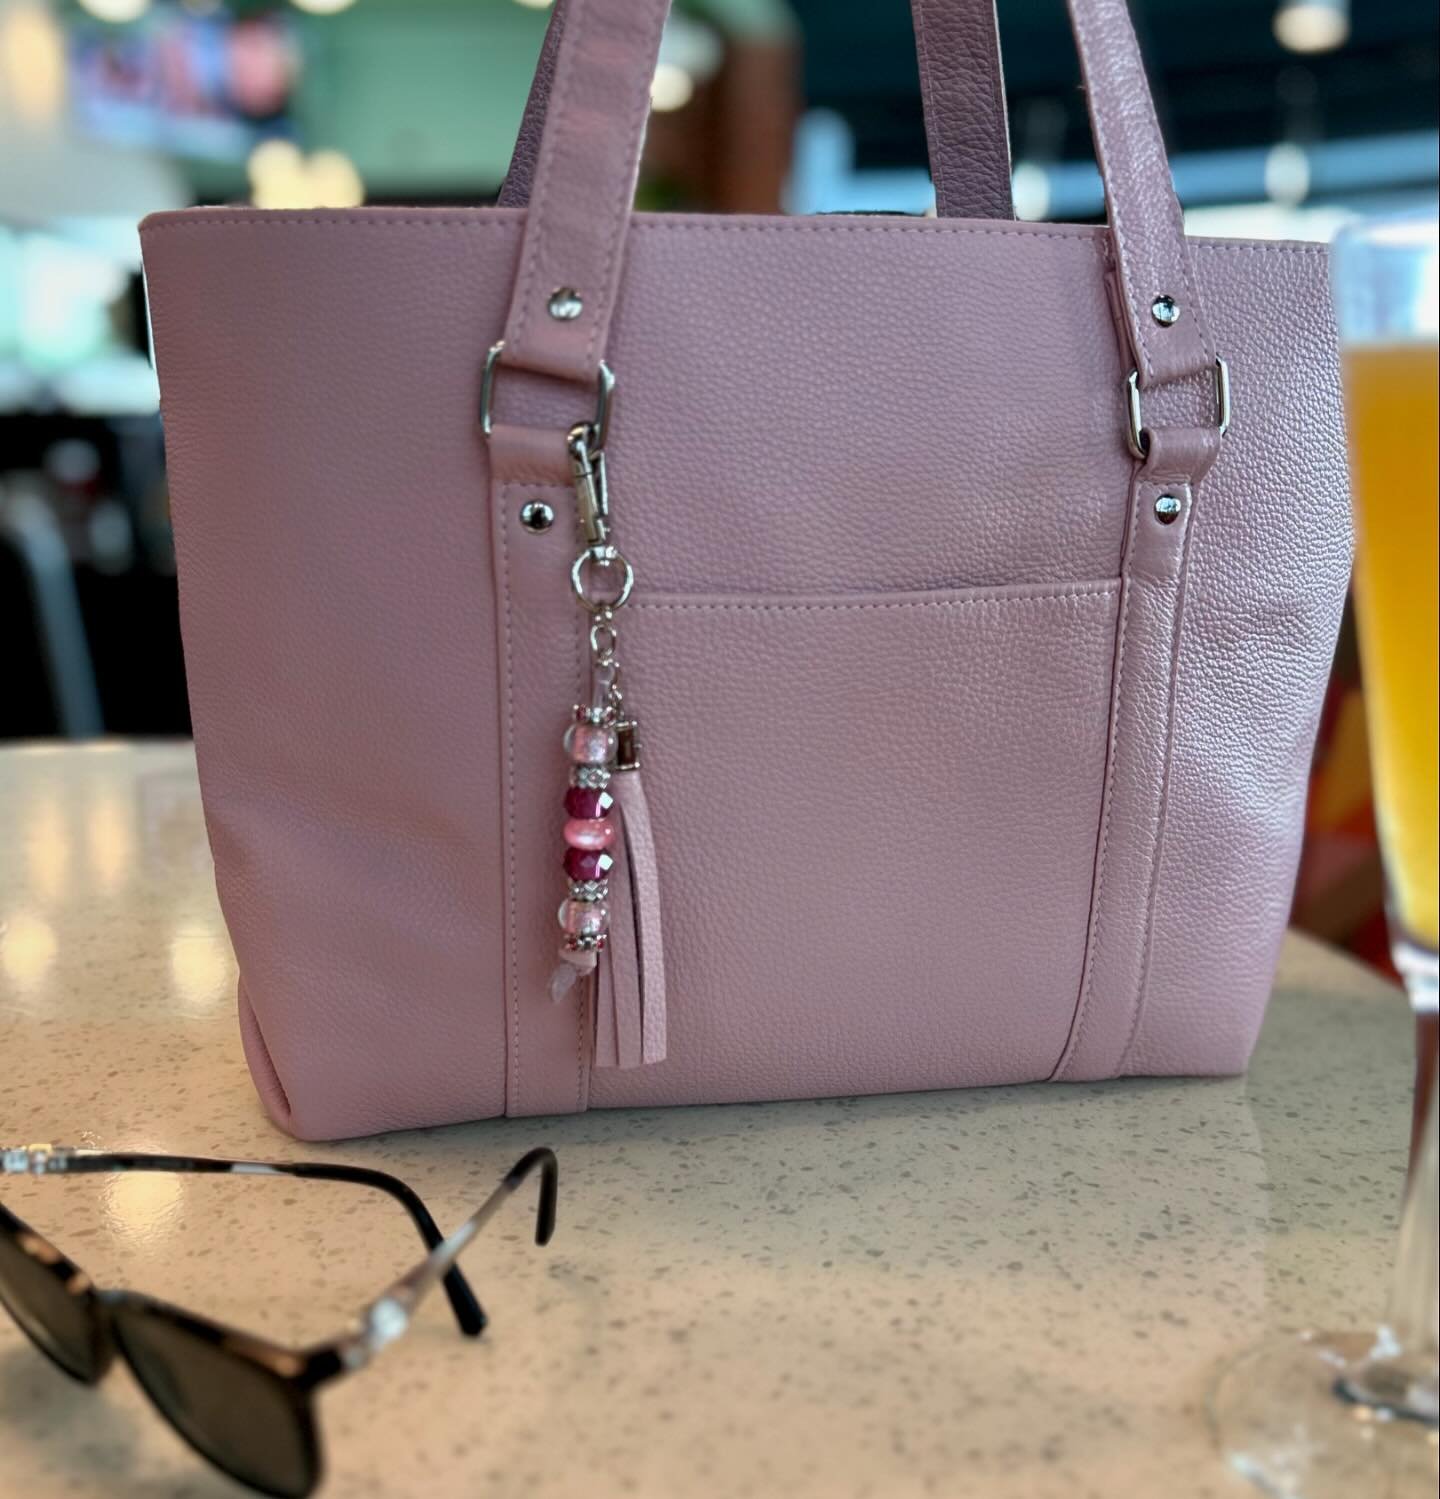 A little showing off for the bag I made for my 4th grader&rsquo;s &ldquo;end of year teacher gift&rdquo; 👜🥂. It gave me some fits, but I&rsquo;m really proud of how it came out!

#handmade #leather @tandyleather #starbucksaddict #slowfashionstyle #